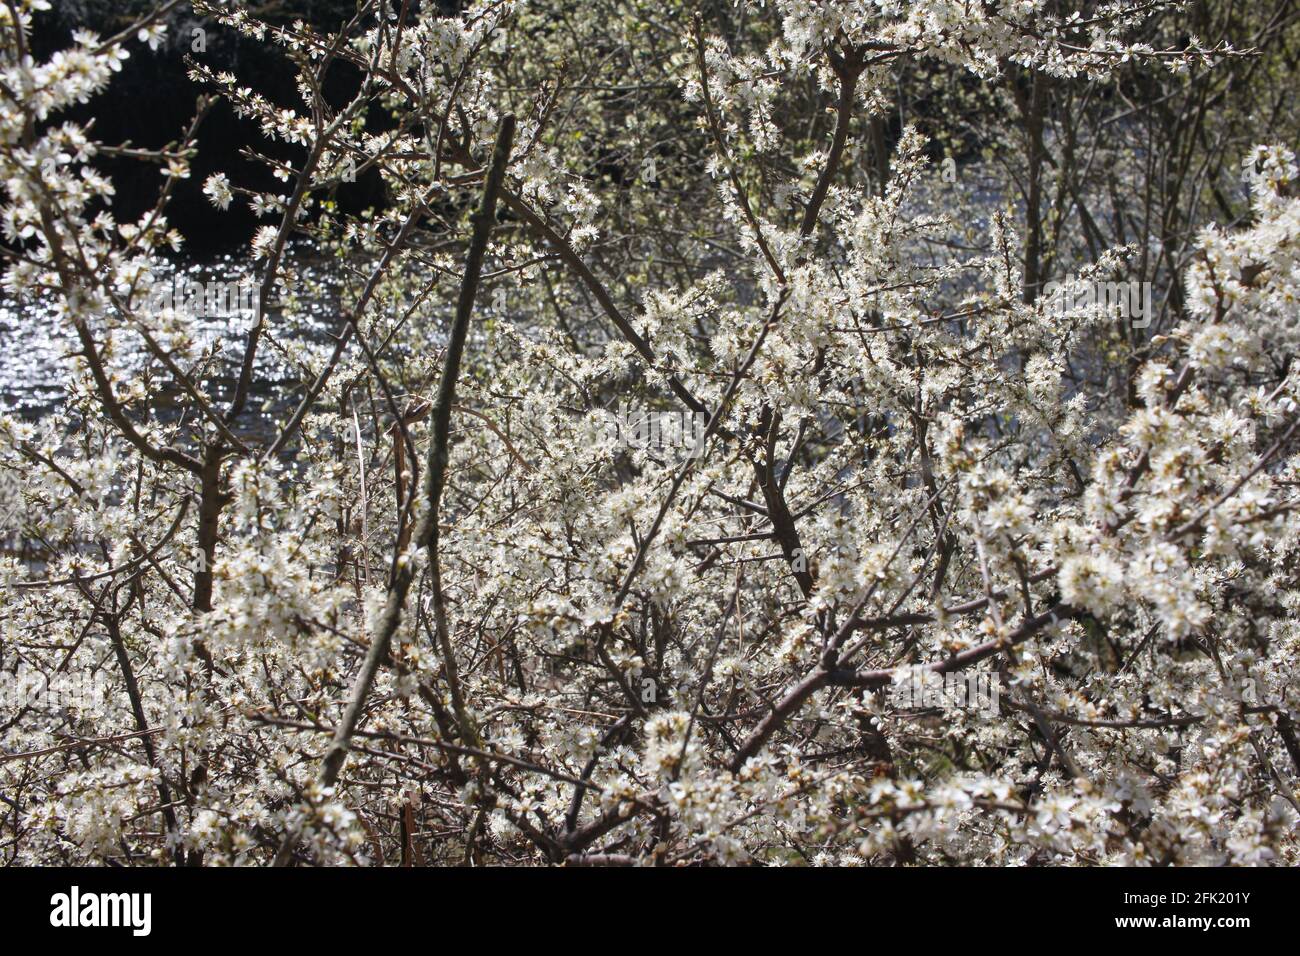 Scenic walks by the riverside, white blossoms flowering on a tree. Spring awakening, trees inspiration change and transformational beauty. Stock Photo